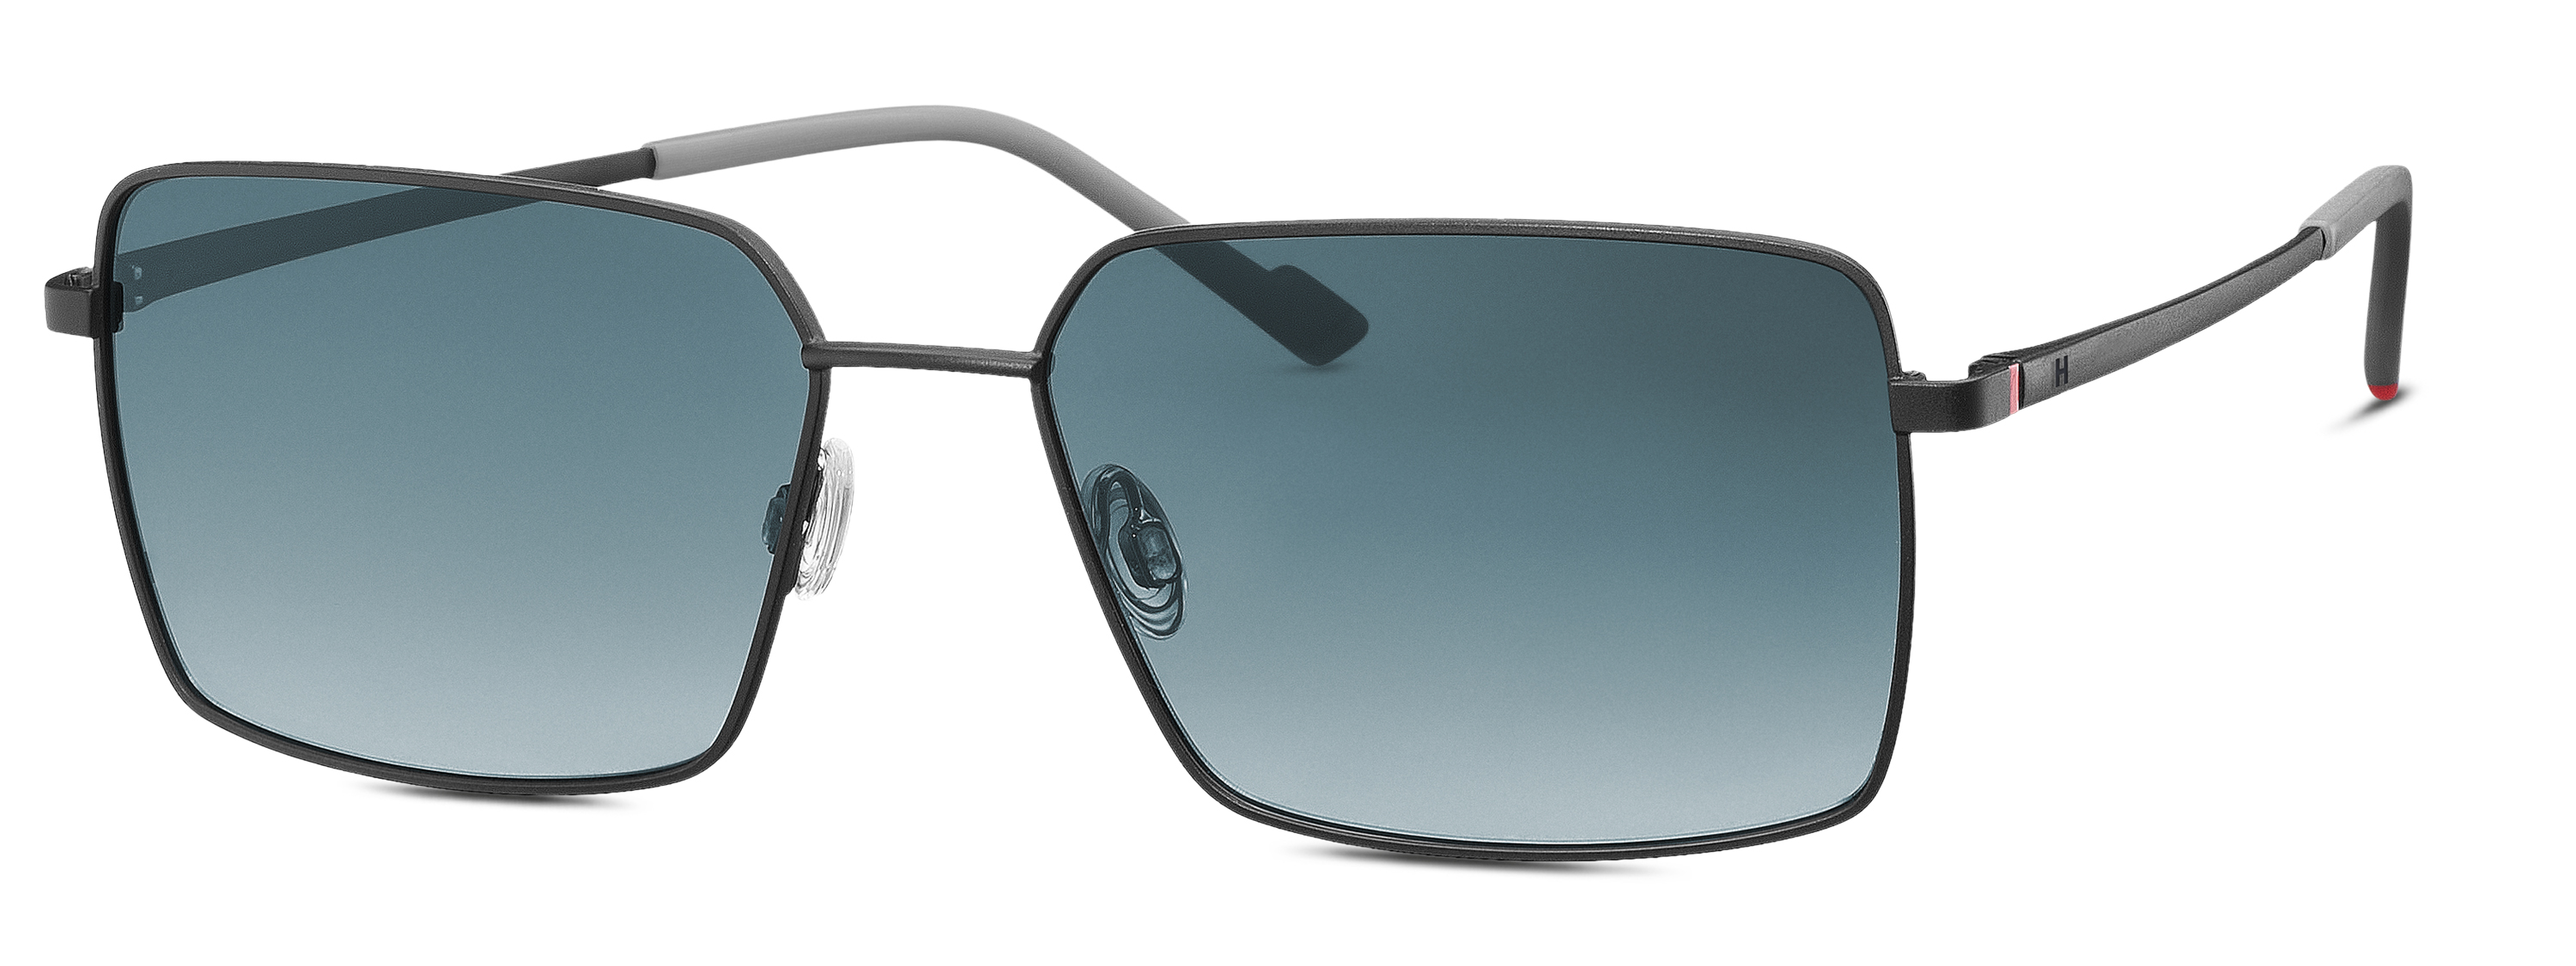 [products.image.front] HUMPHREY´S eyewear 585334 10 Sonnenbrille